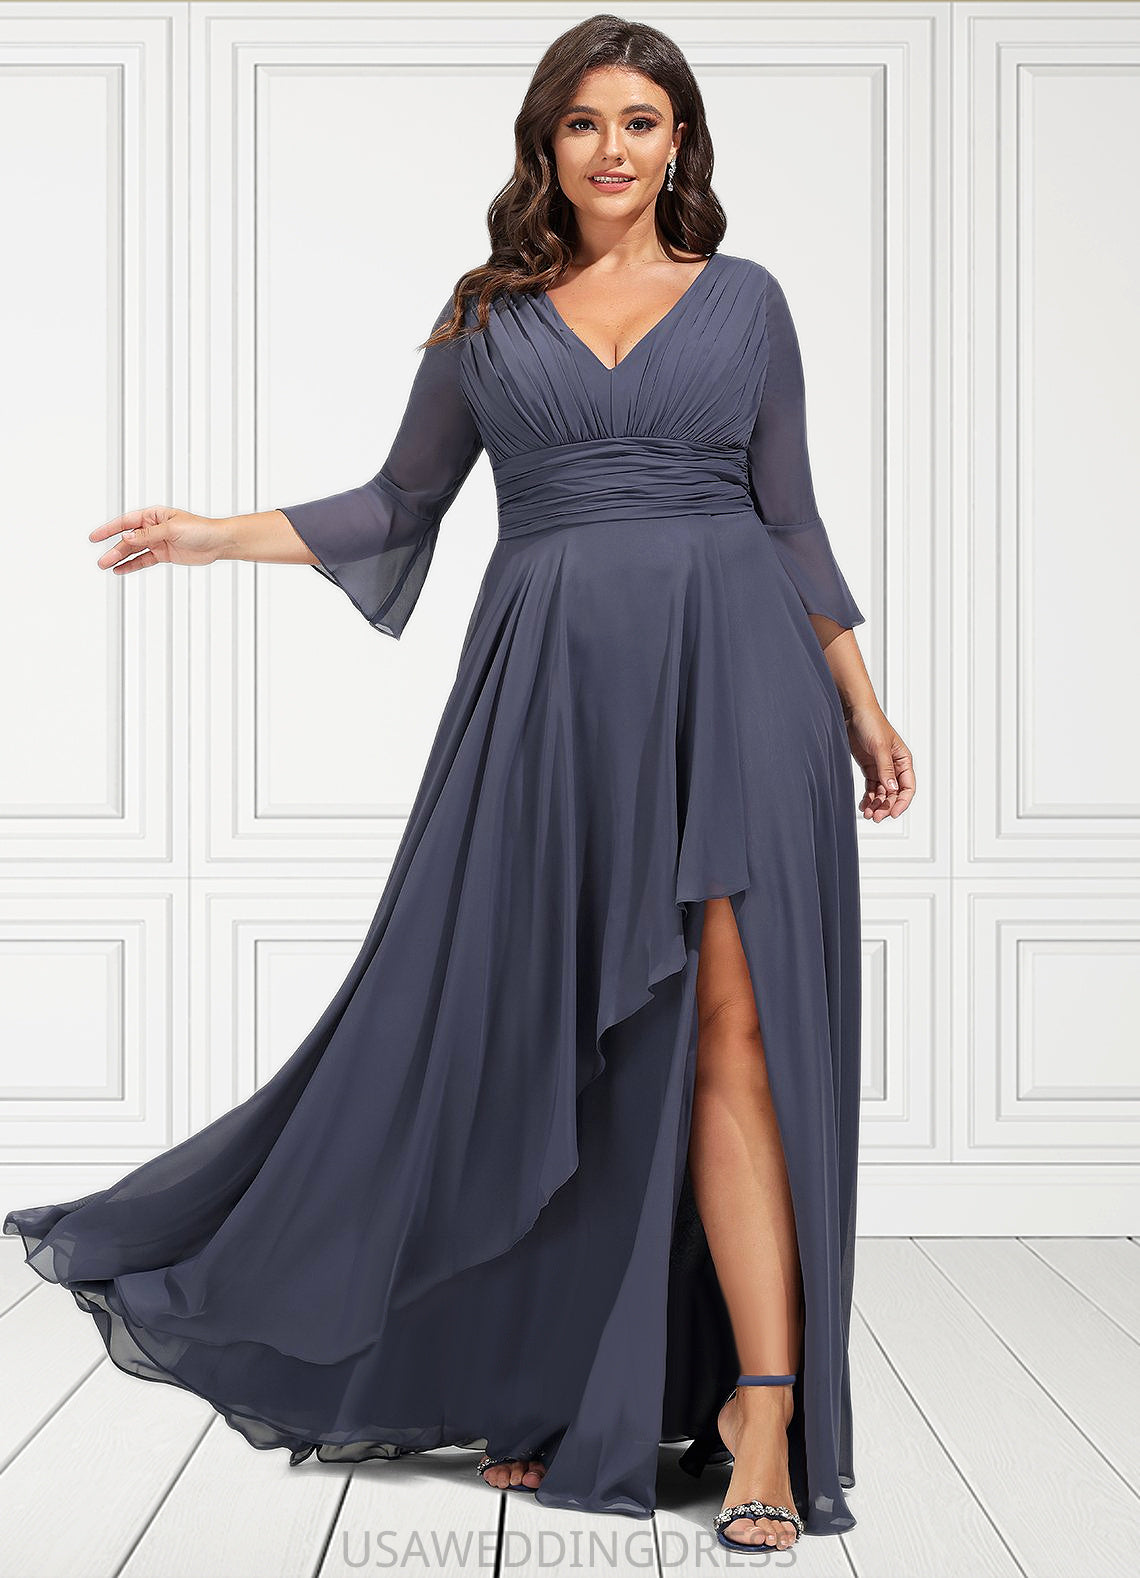 Yadira A-line V-Neck Floor-Length Chiffon Mother of the Bride Dress With Cascading Ruffles DS126P0021653